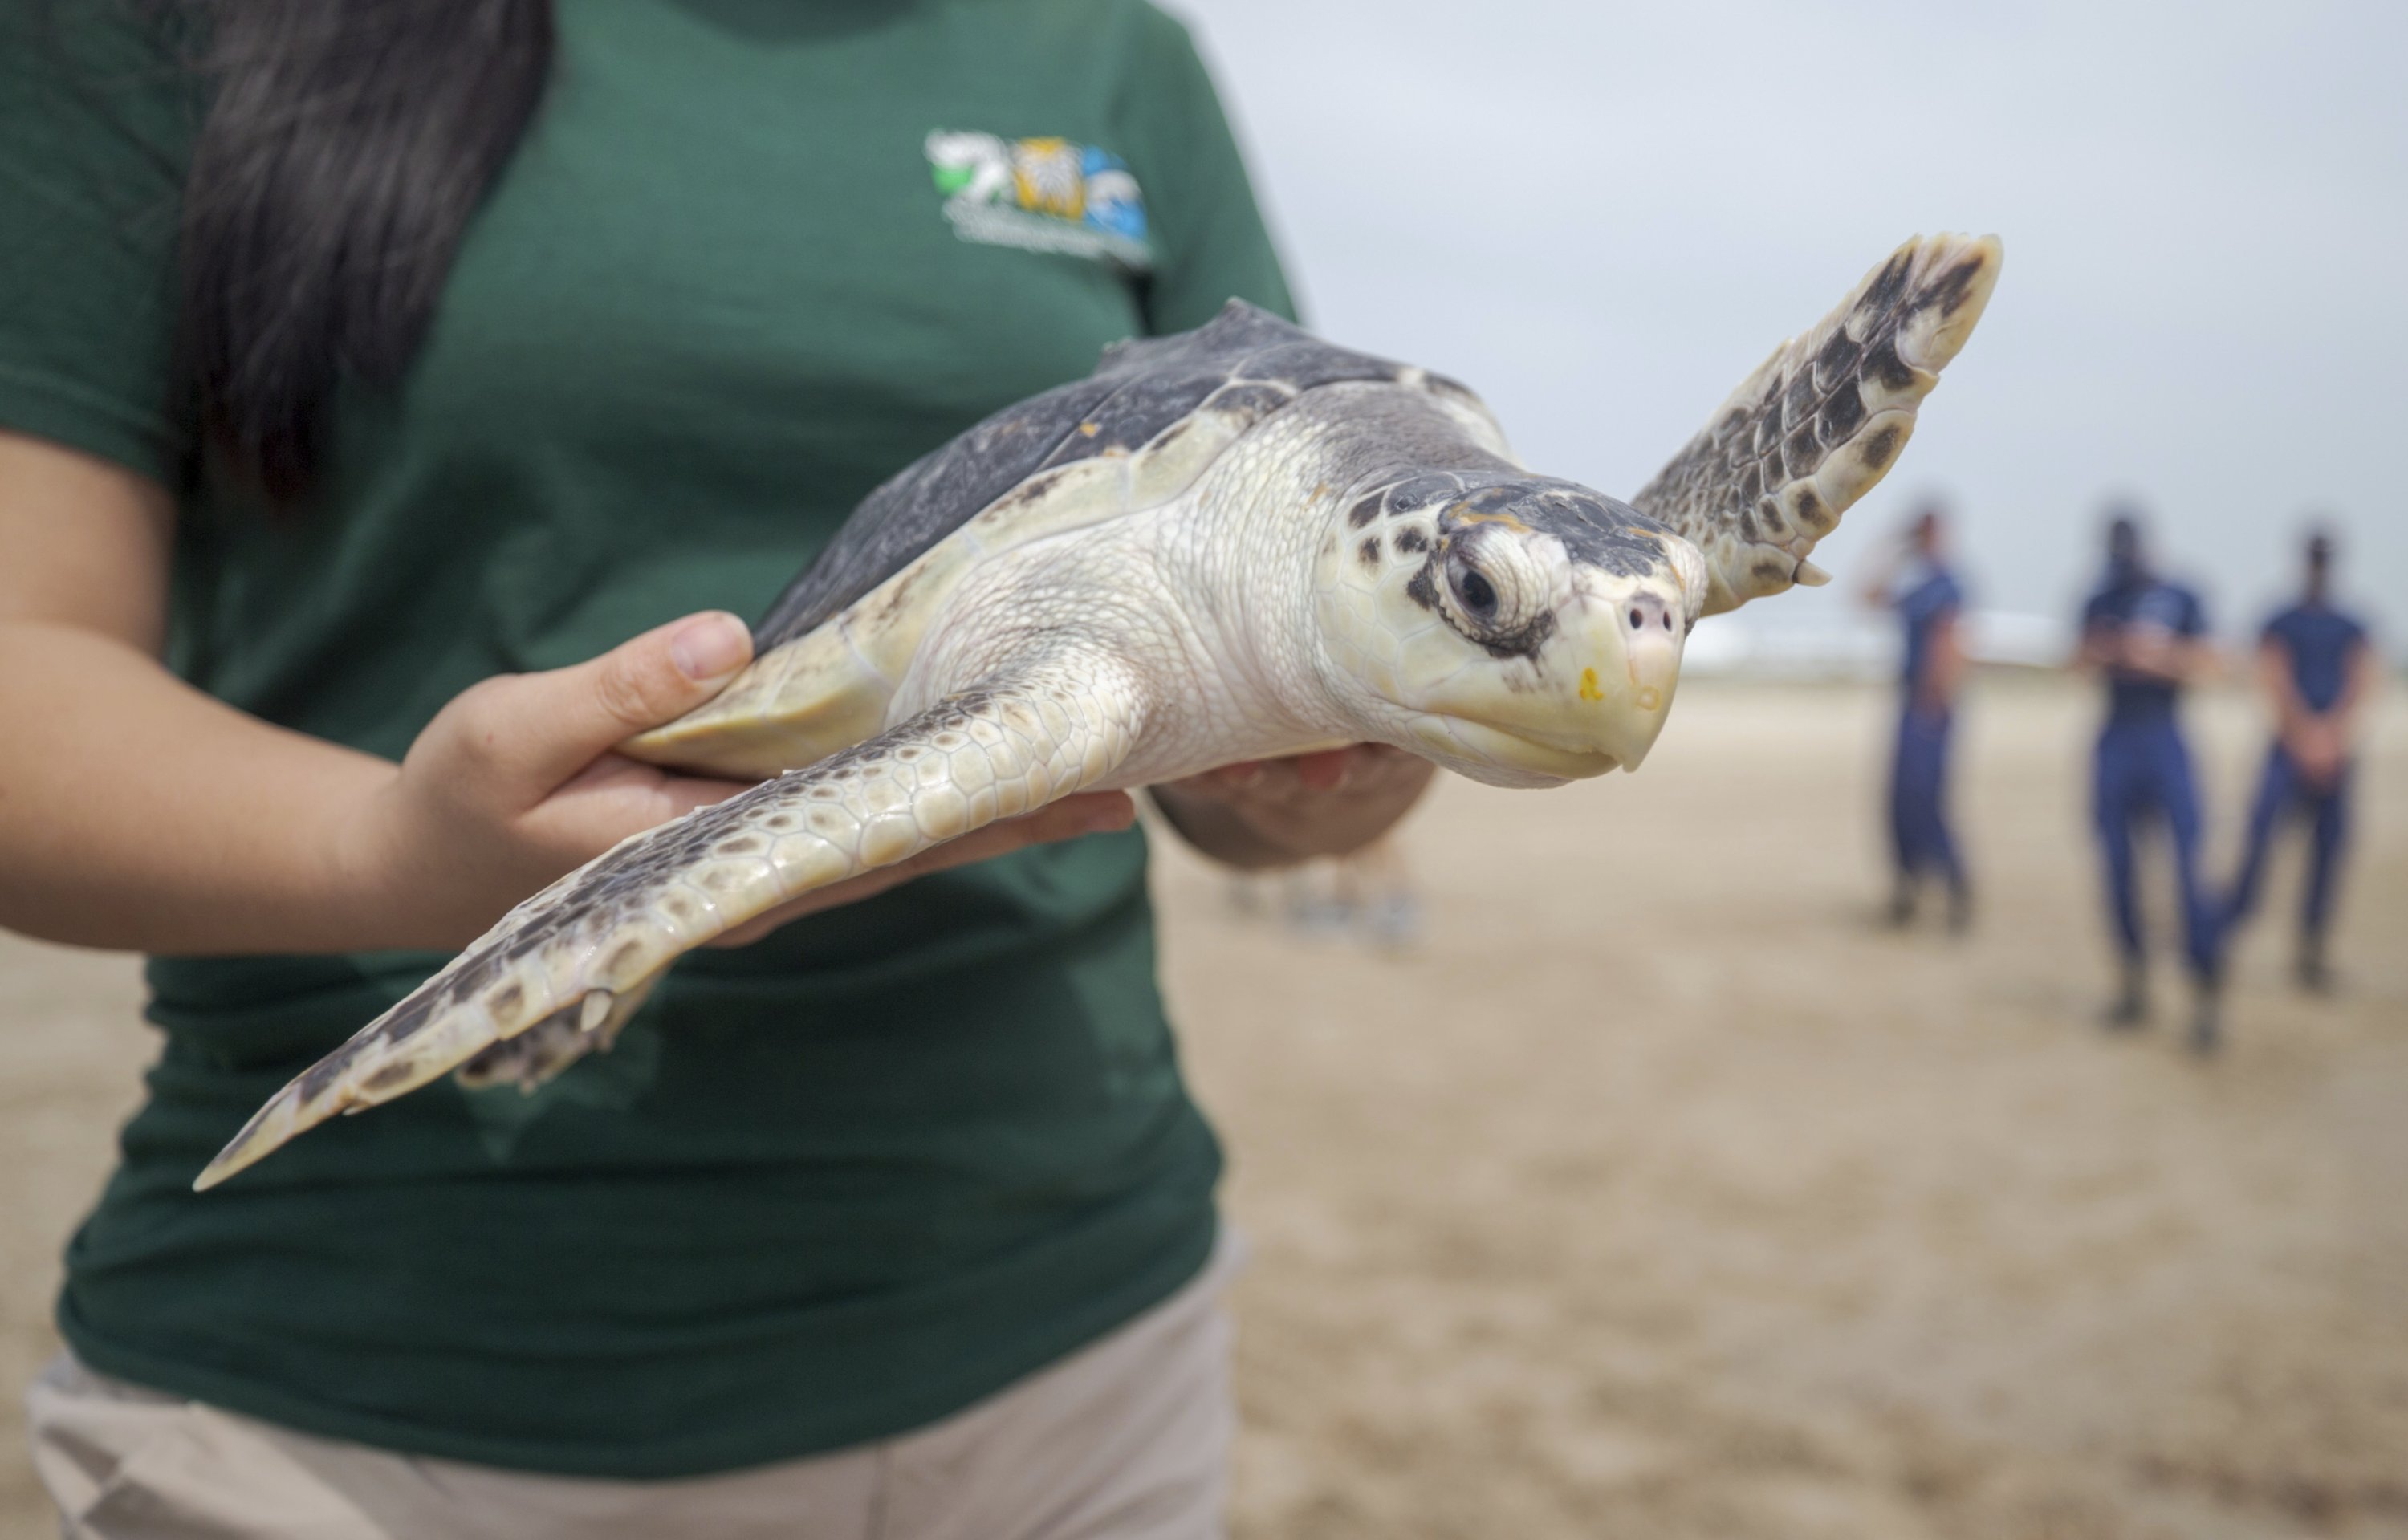 4,300 coldstunned sea turtles rescued in Texas, released into nature